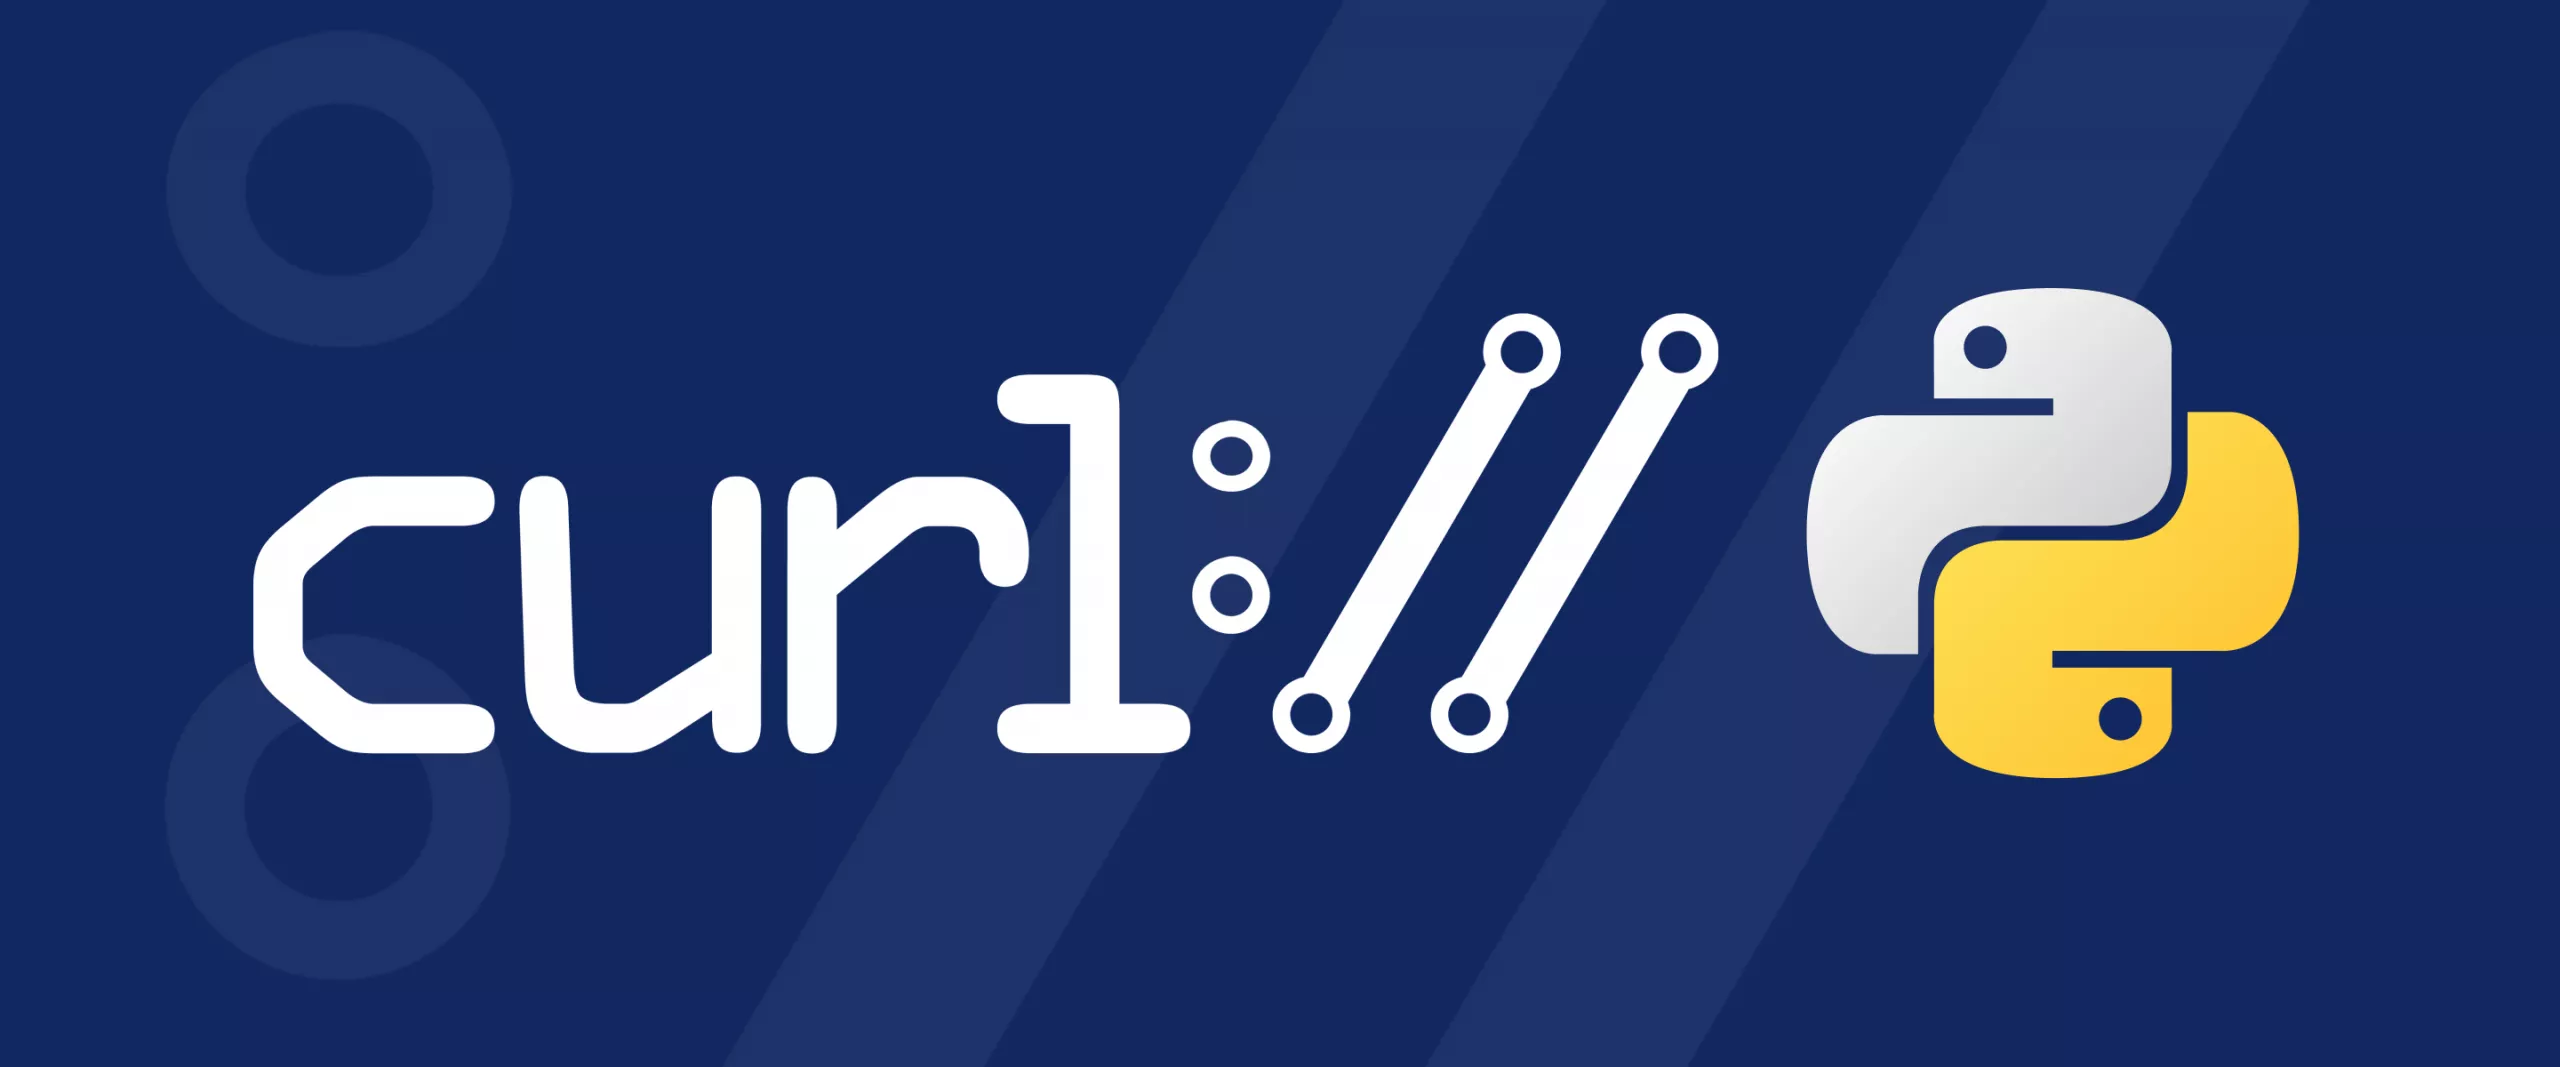 How to Use cURL in Python